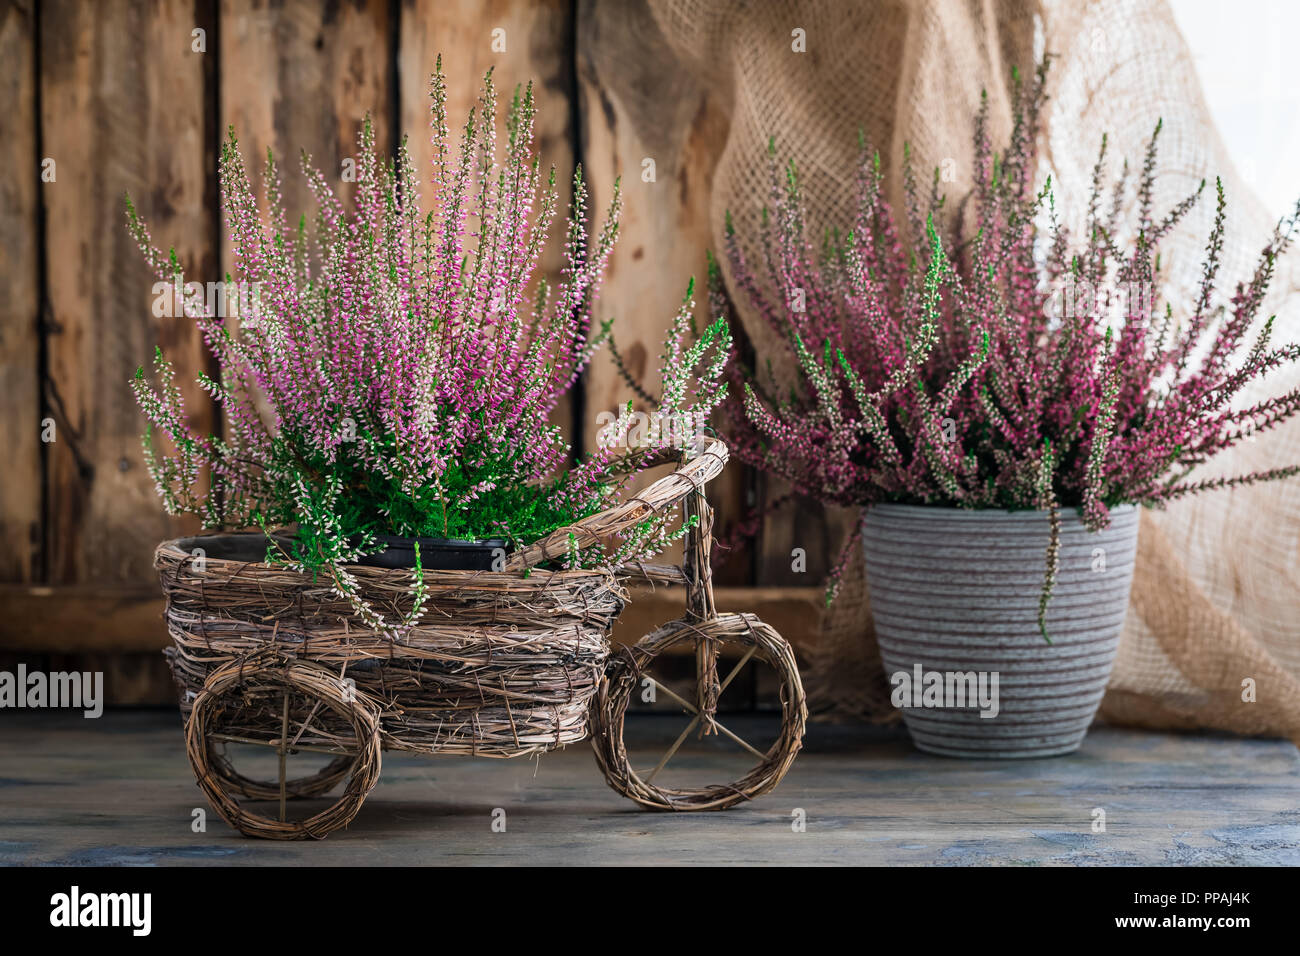 Cultivated potted pink calluna vulgaris or common heather flowers standing on wooden background, toned Stock Photo